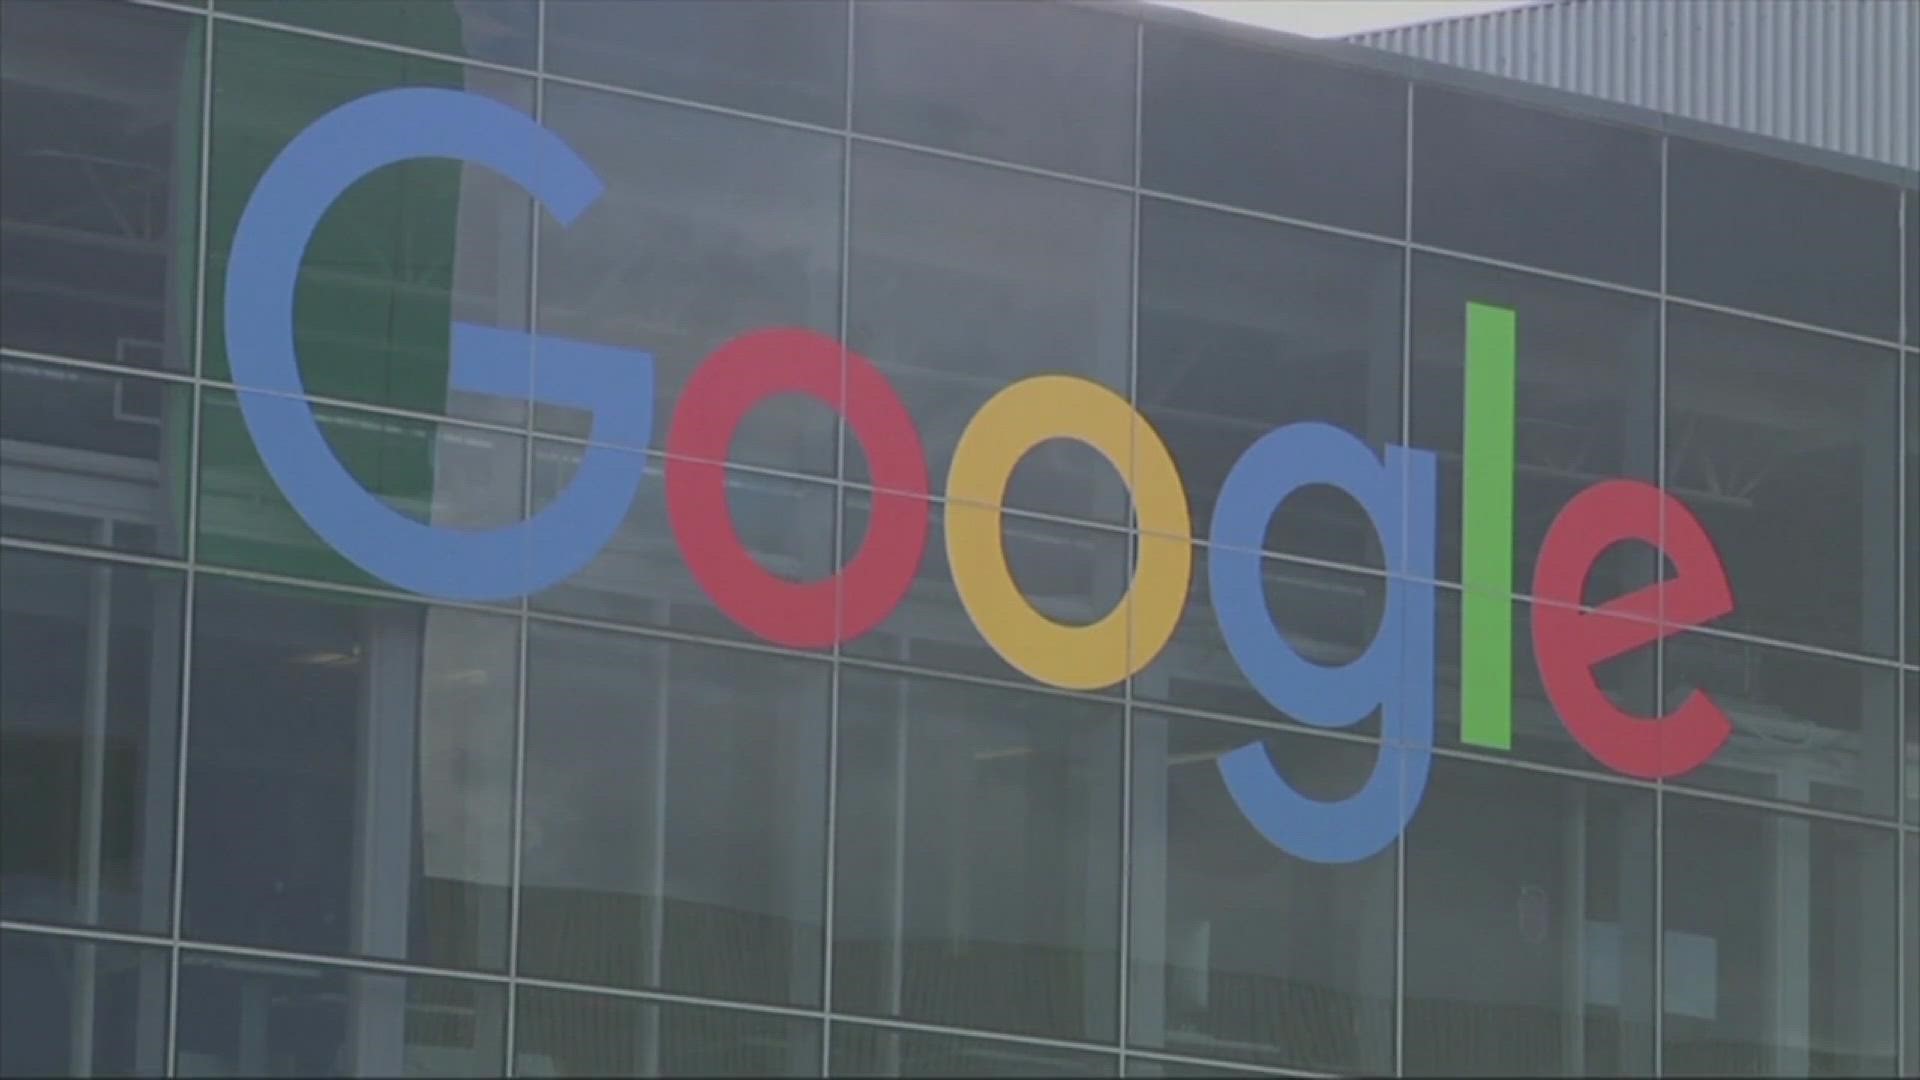 Google announces it would cut almost 12,000 jobs, and Microsoft announced it would lay off 10,000 employees.